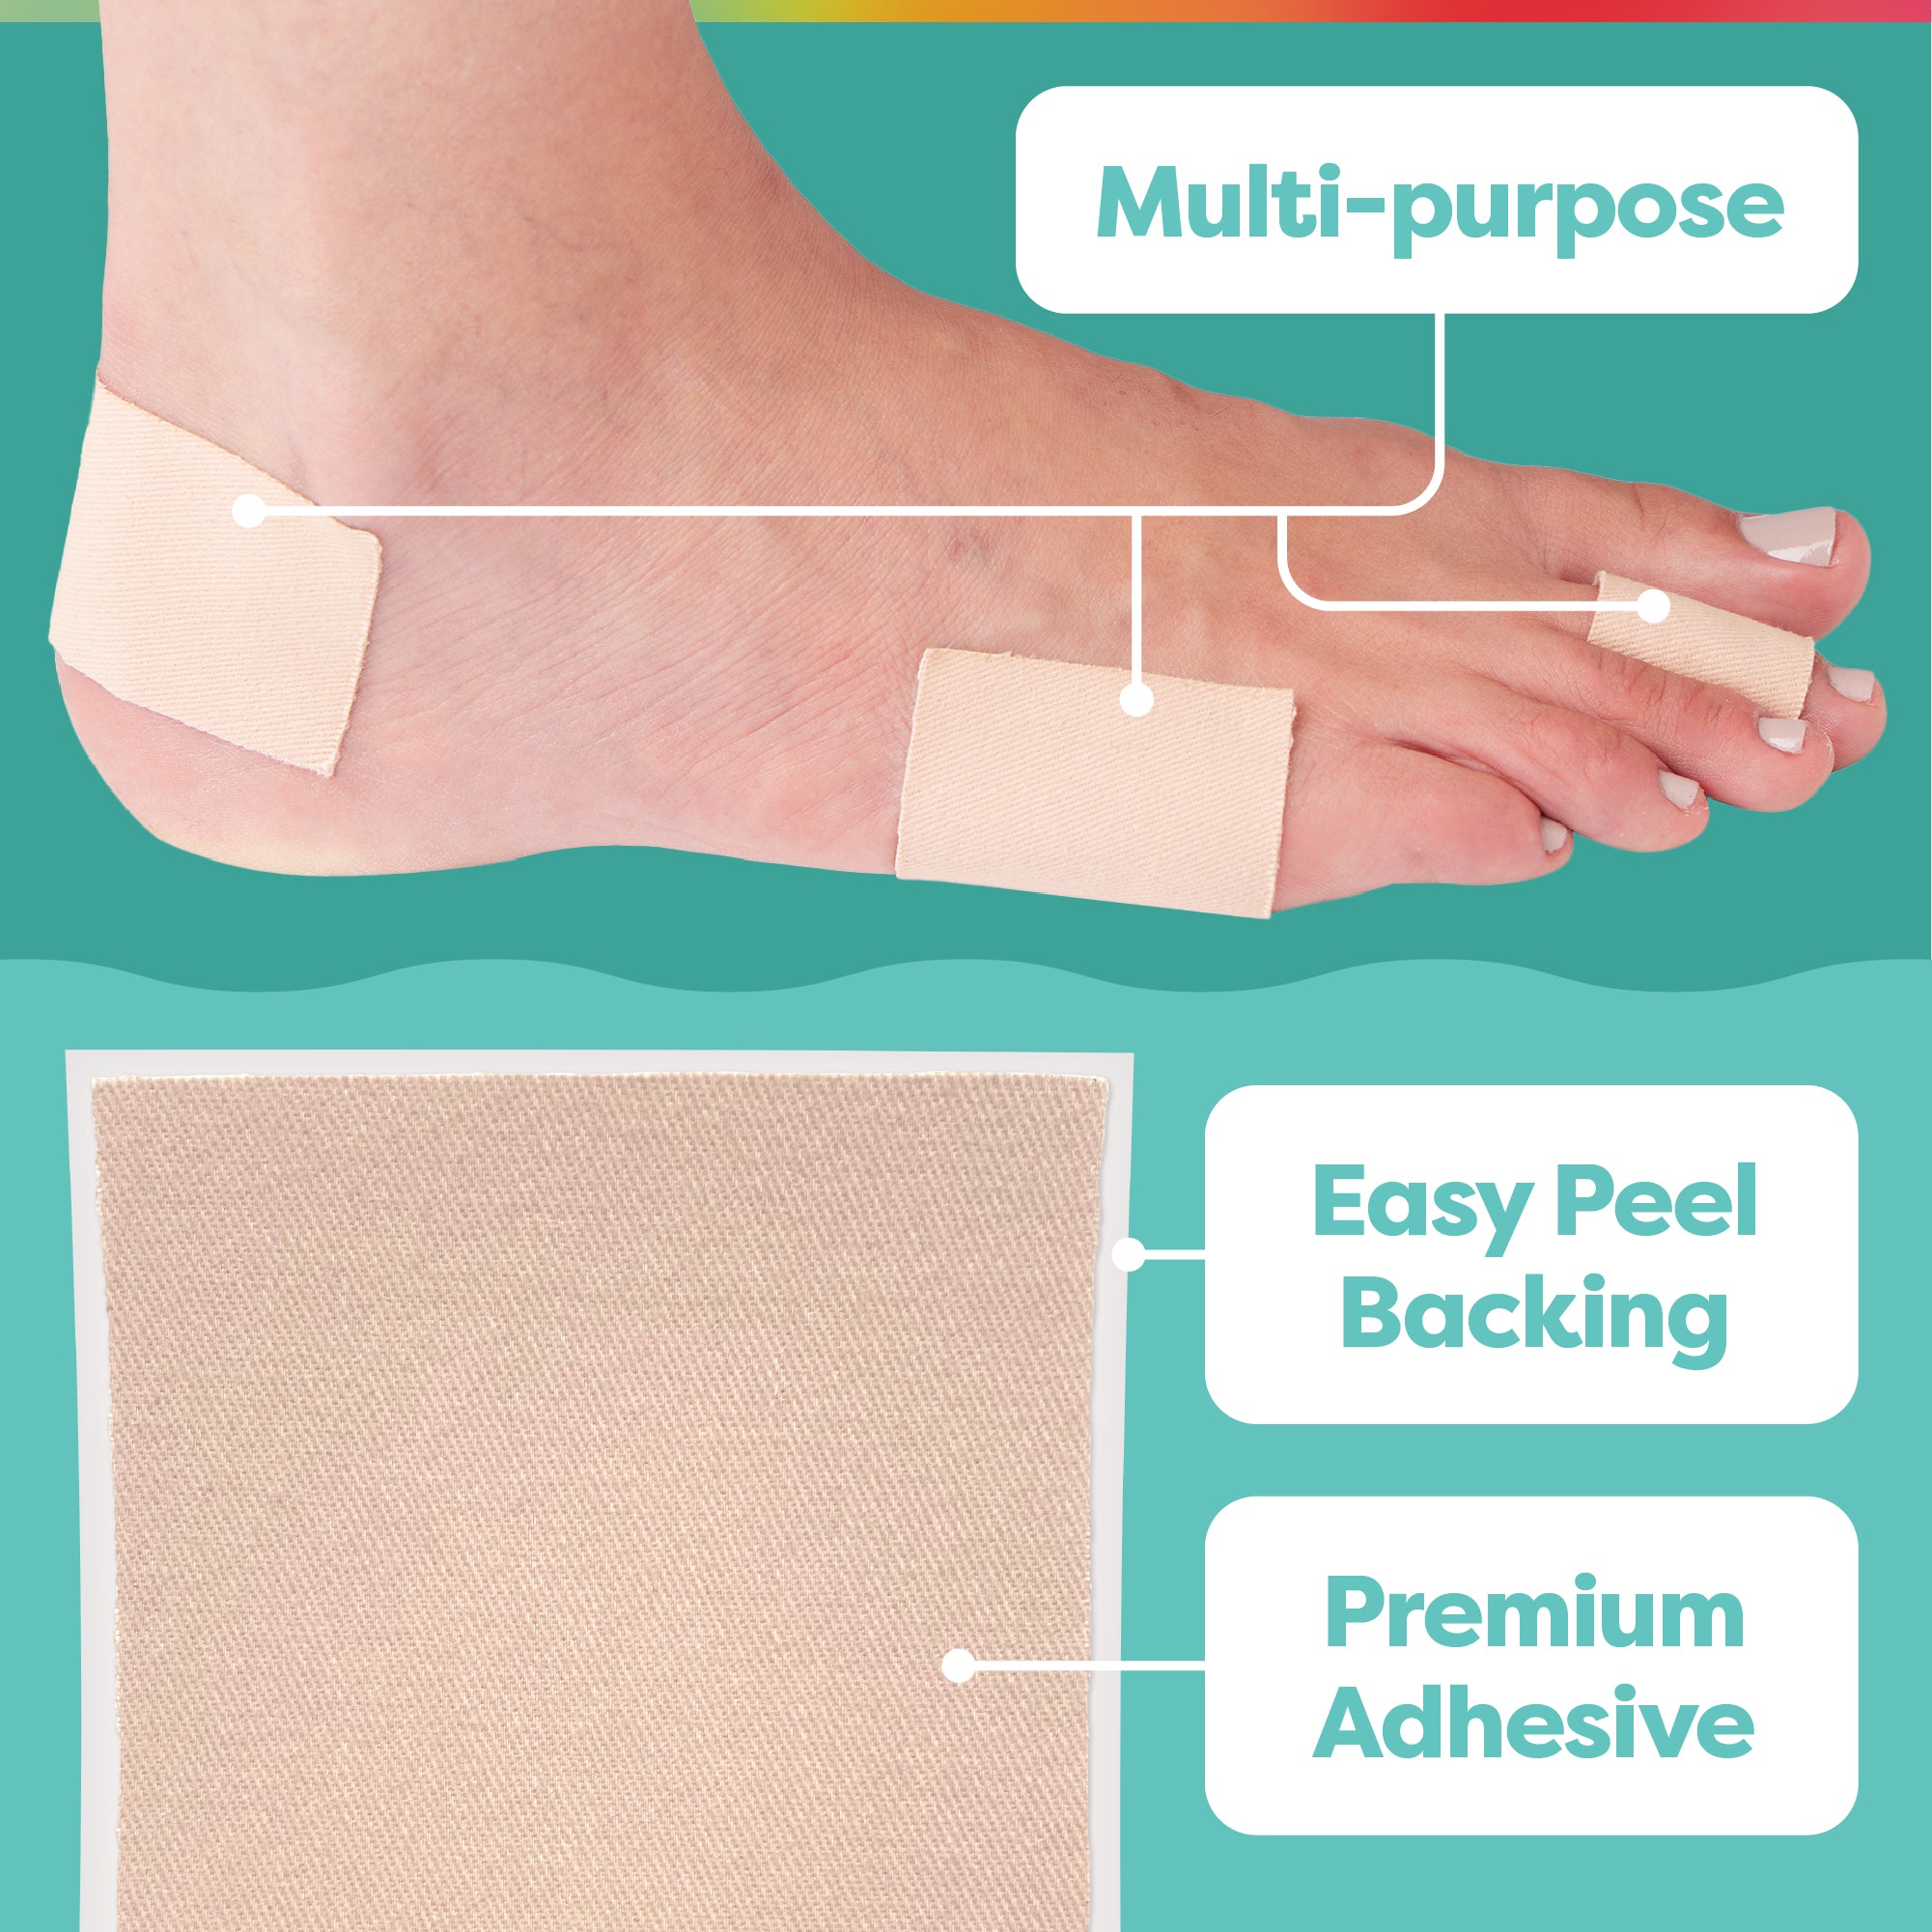 ZenToes Moleskin Blister Prevention Sheets to Protect Feet, Toes and Heels from Rubbing Shoes, Size: One size, Beige